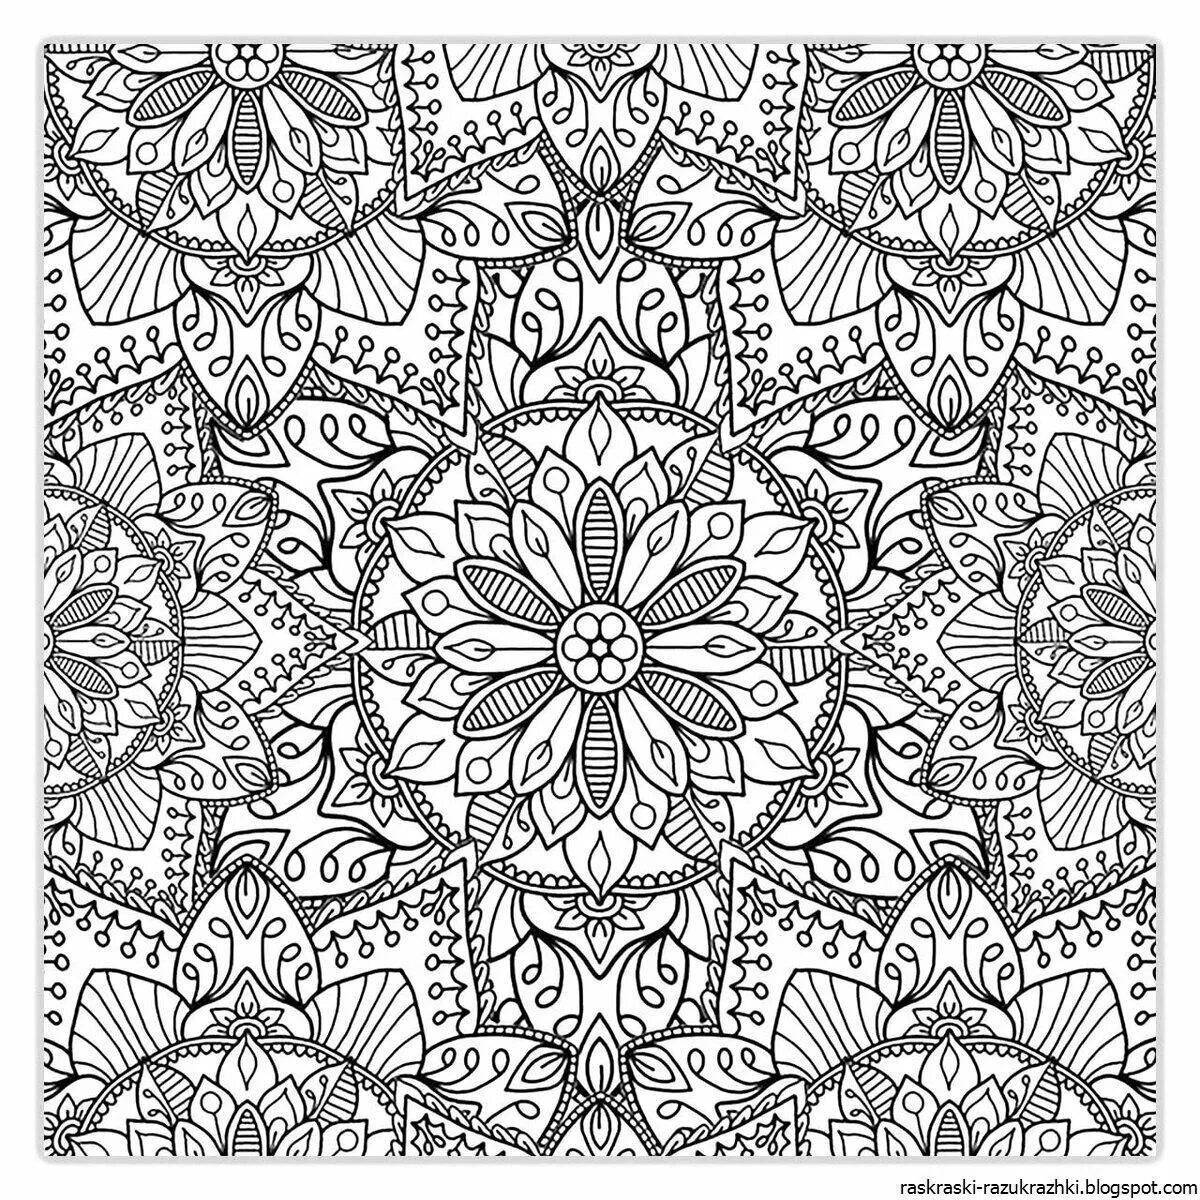 Coloring page with intricate patterns - elegant